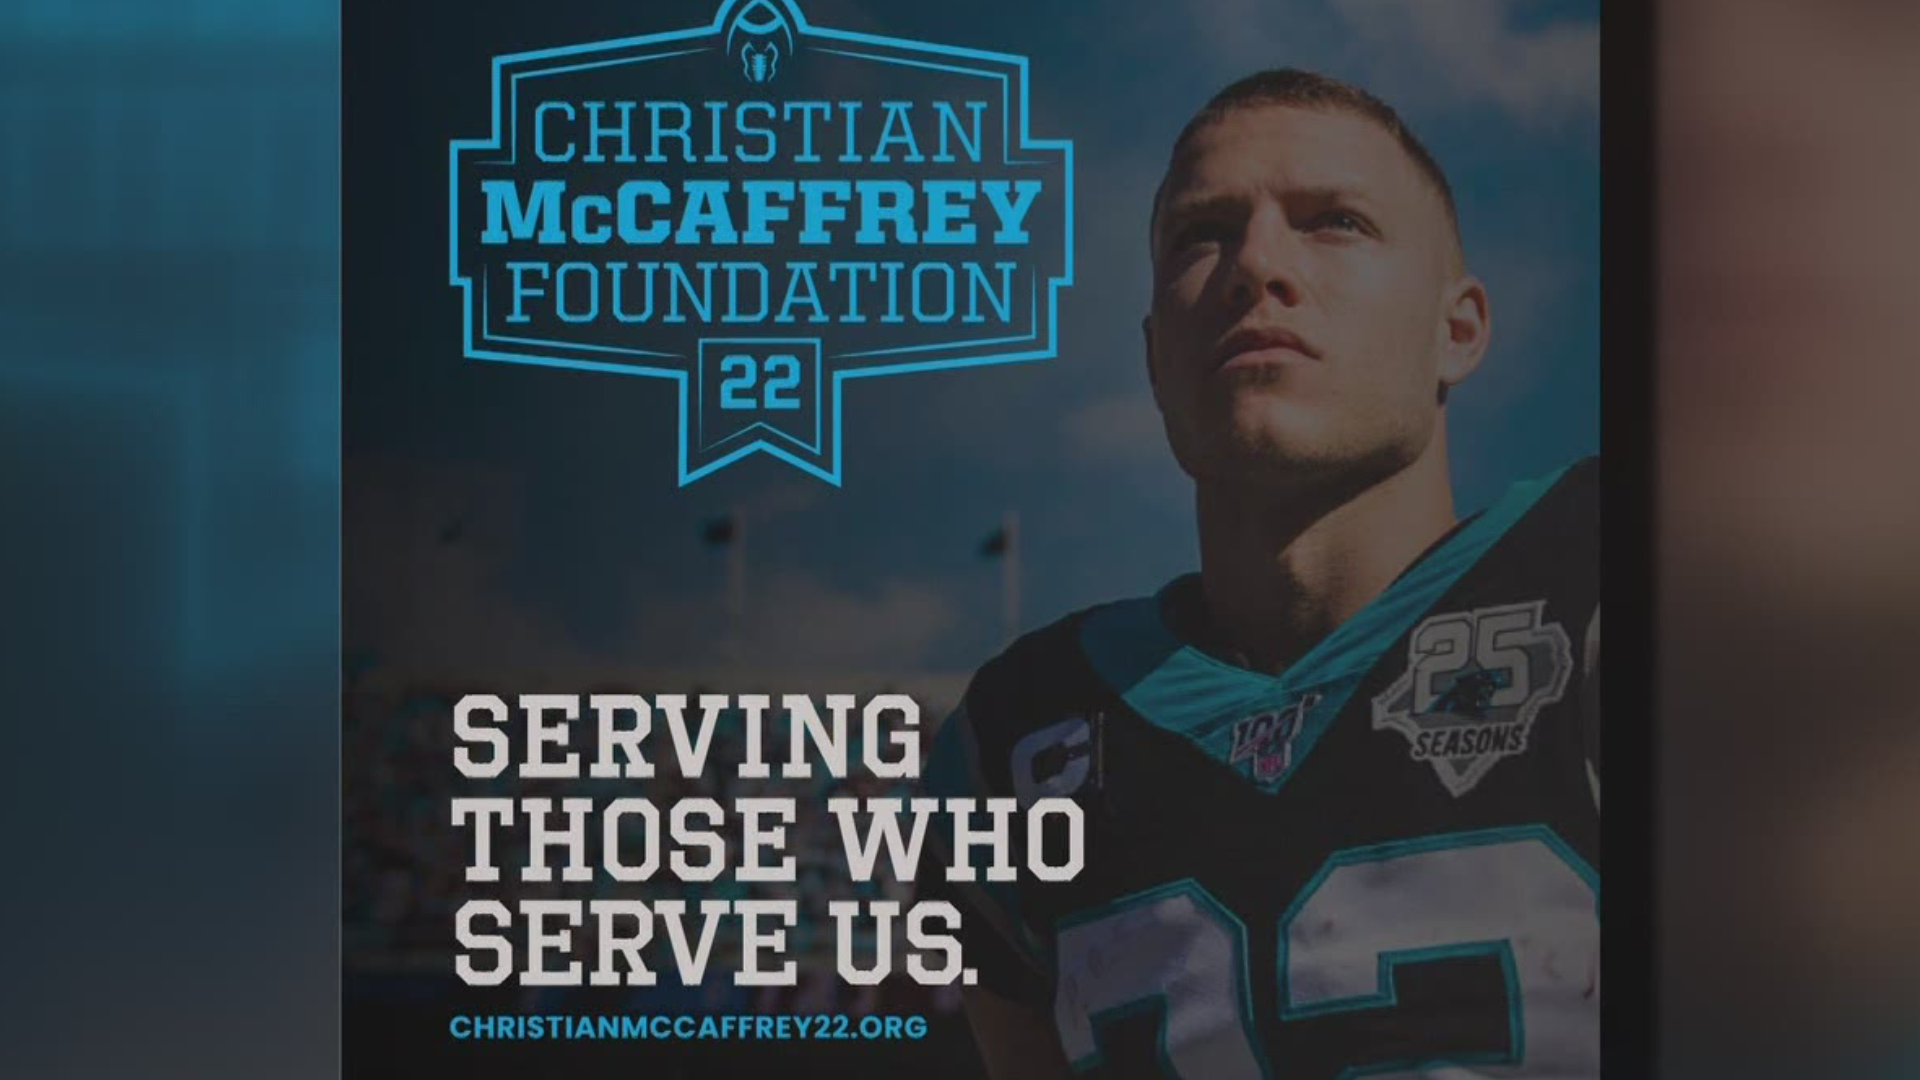 The Christian McCaffrey Foundation is an official 501©3 aimed at "serving those who serve us."